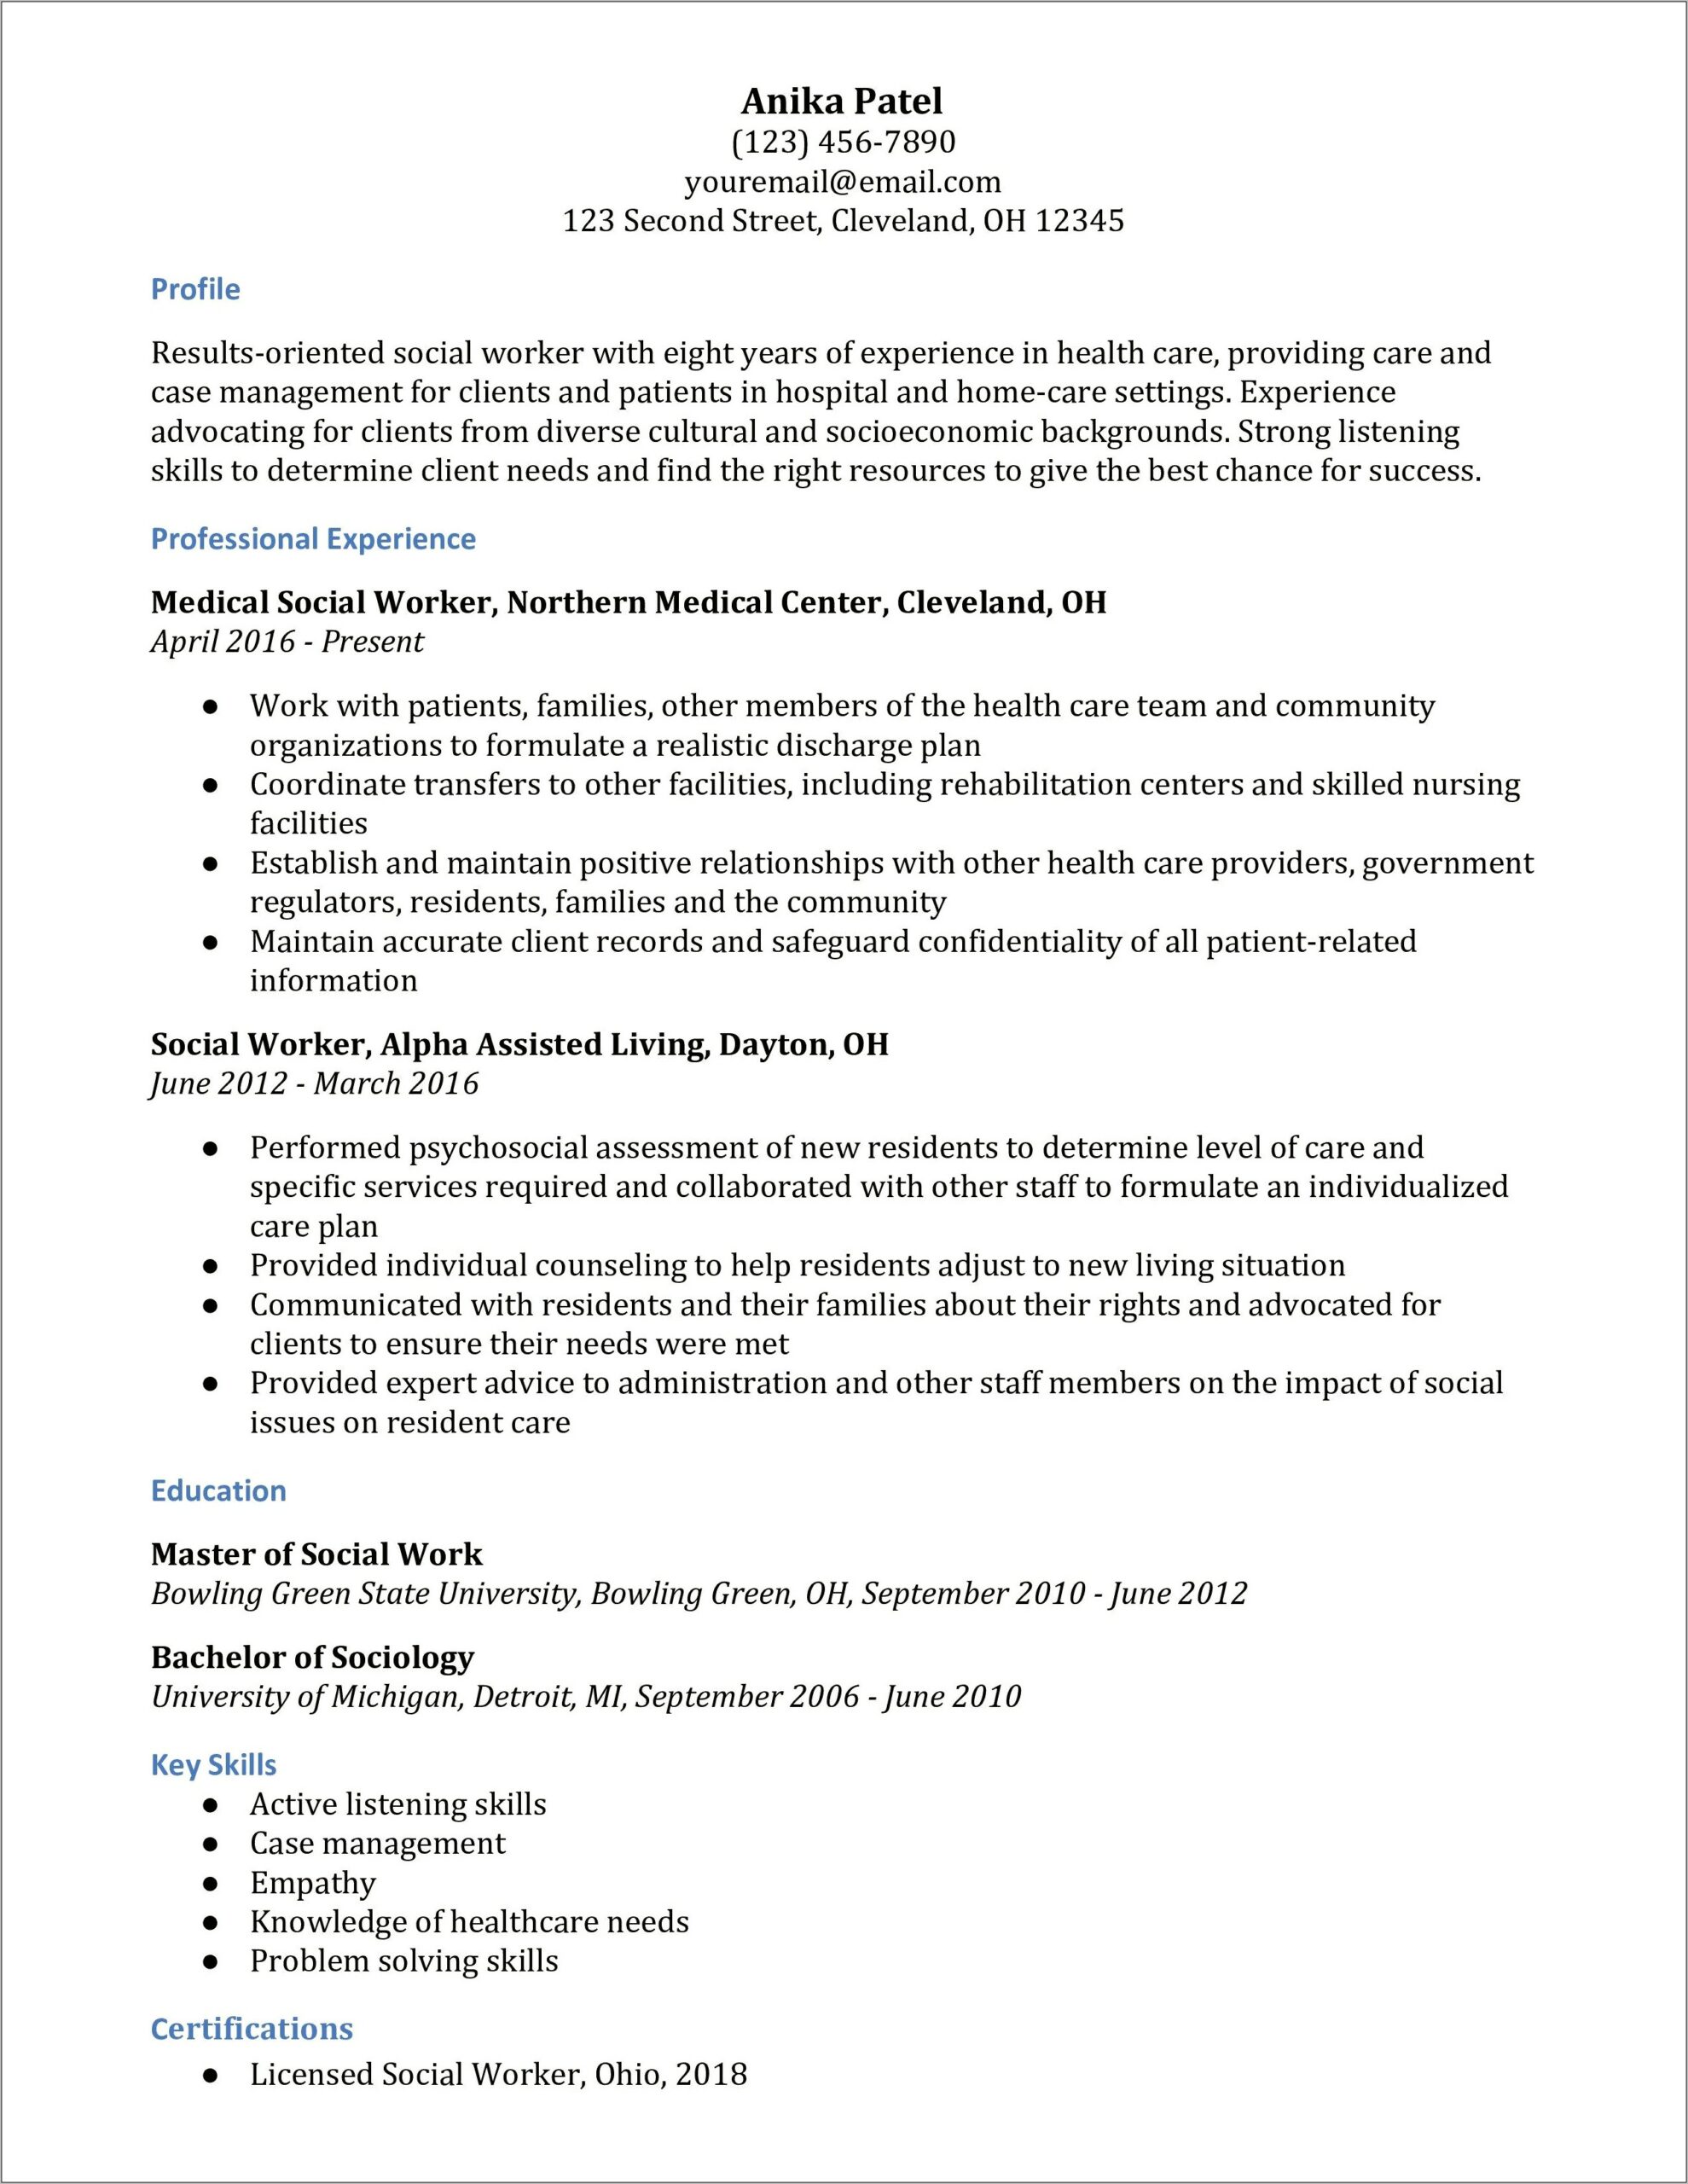 Skills To List On Resume For Social Worker